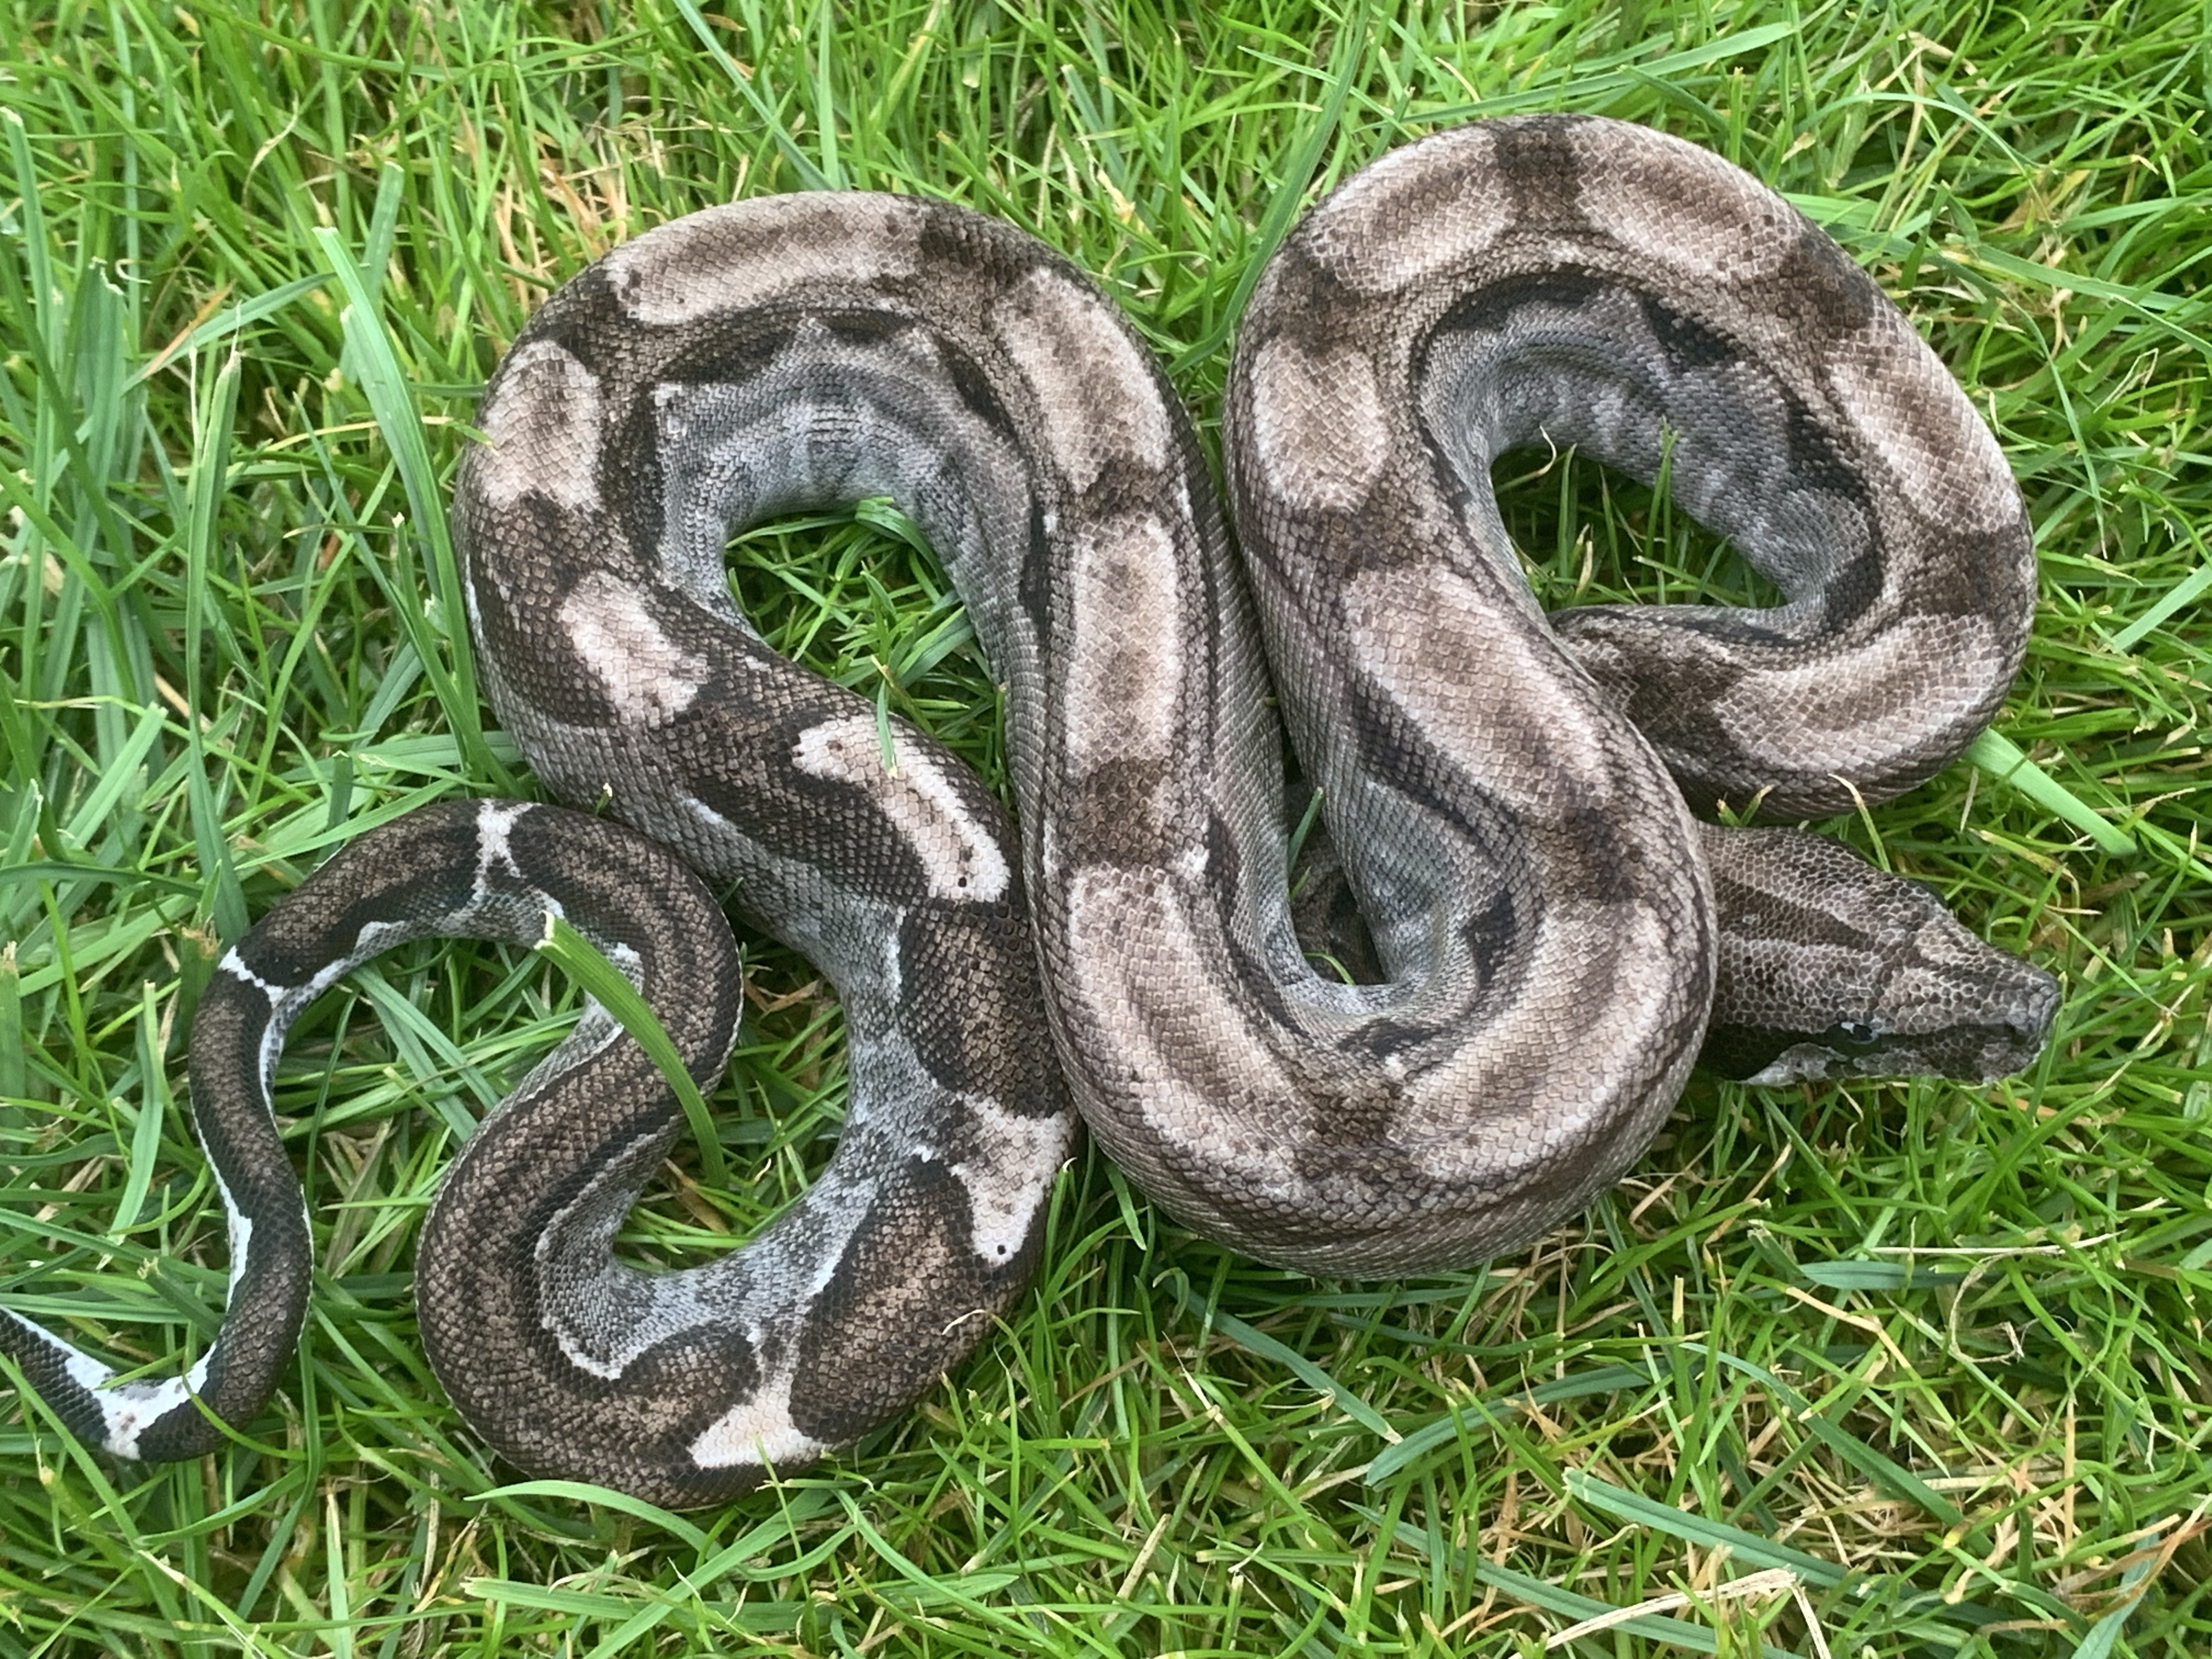 RDR Black Eyed Anery Boa Constrictor by Kevin Hasley